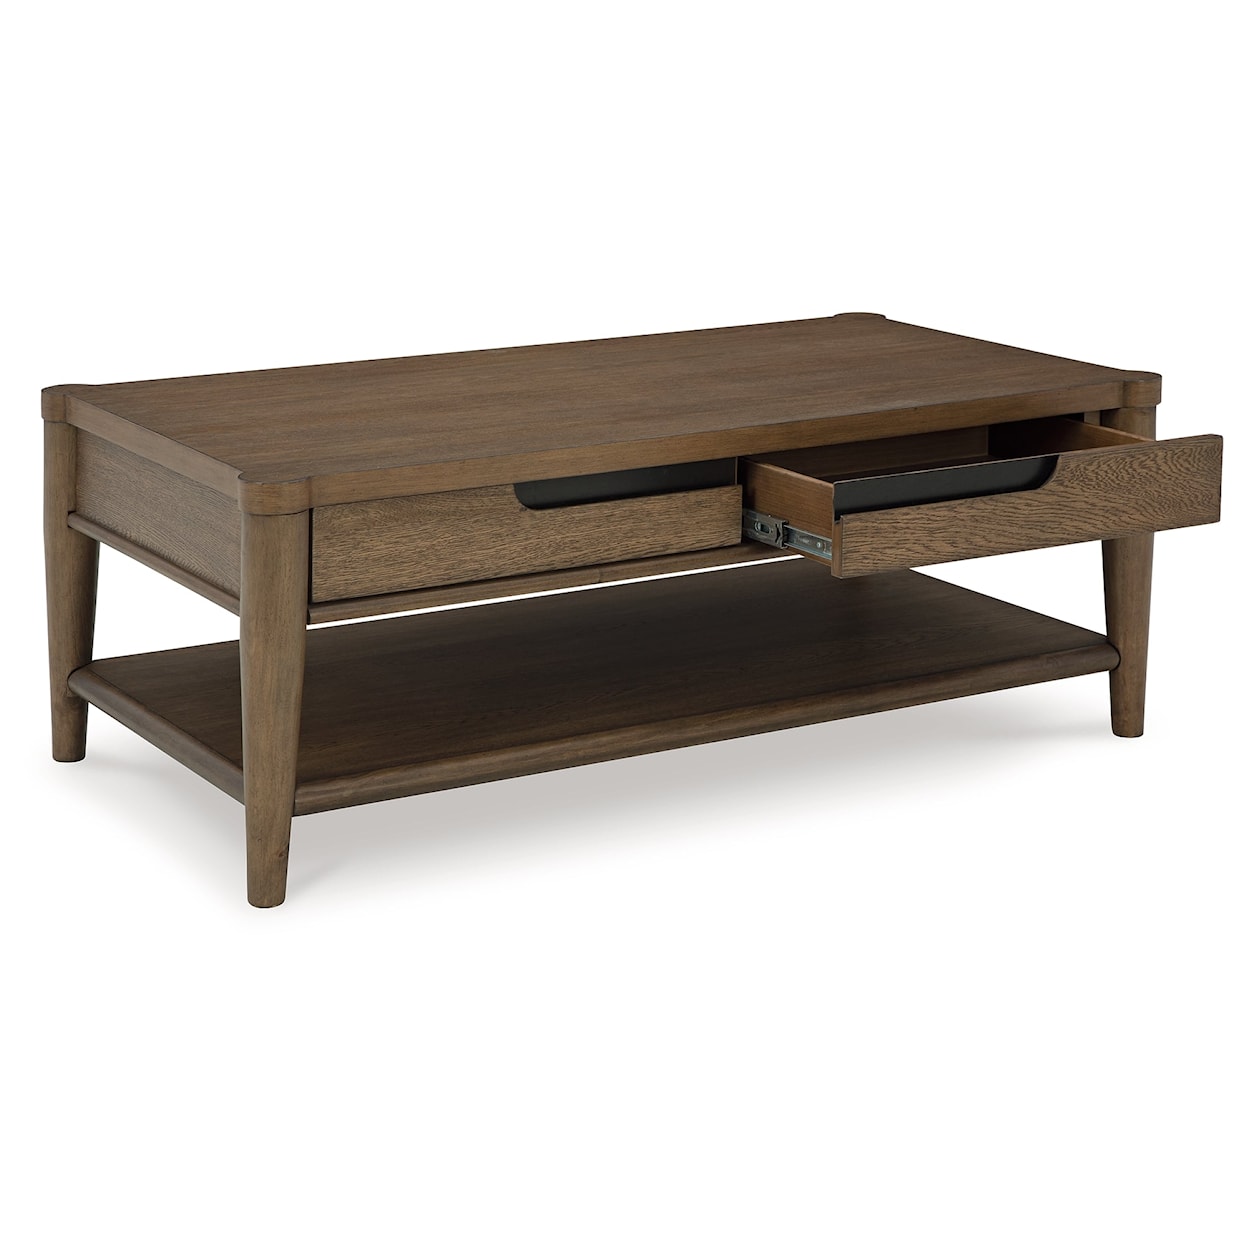 Signature Roanhowe Coffee Table and 2 End Tables